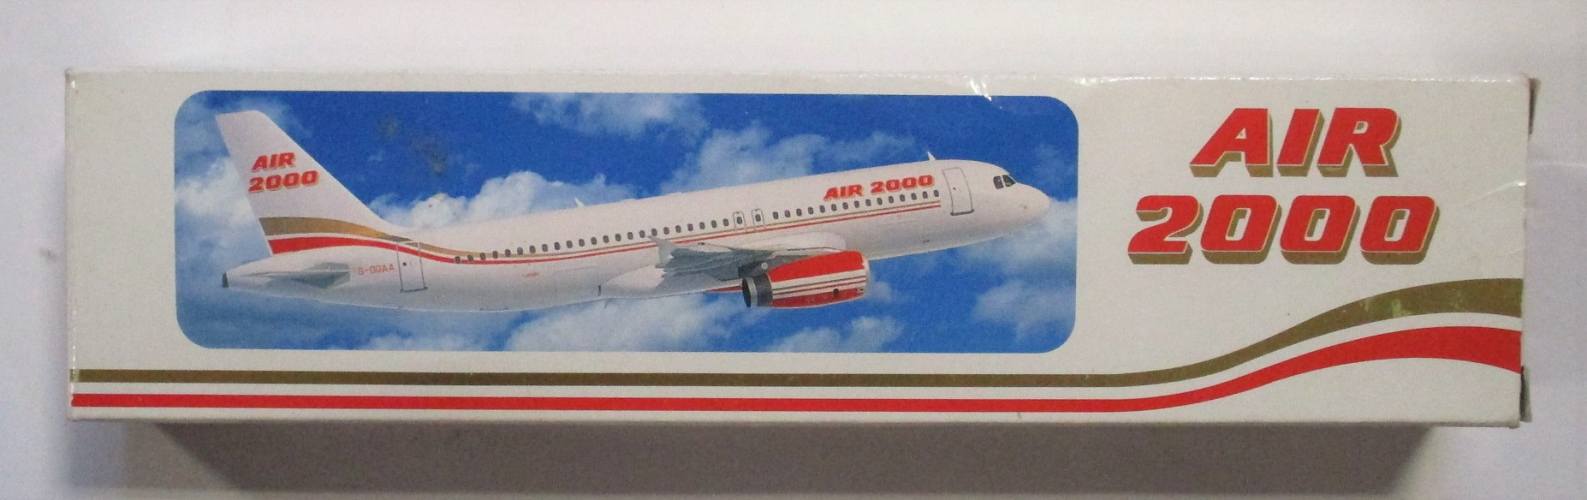 AIRLINER COLLECTIBLE  1/200 AIR 2000 A320